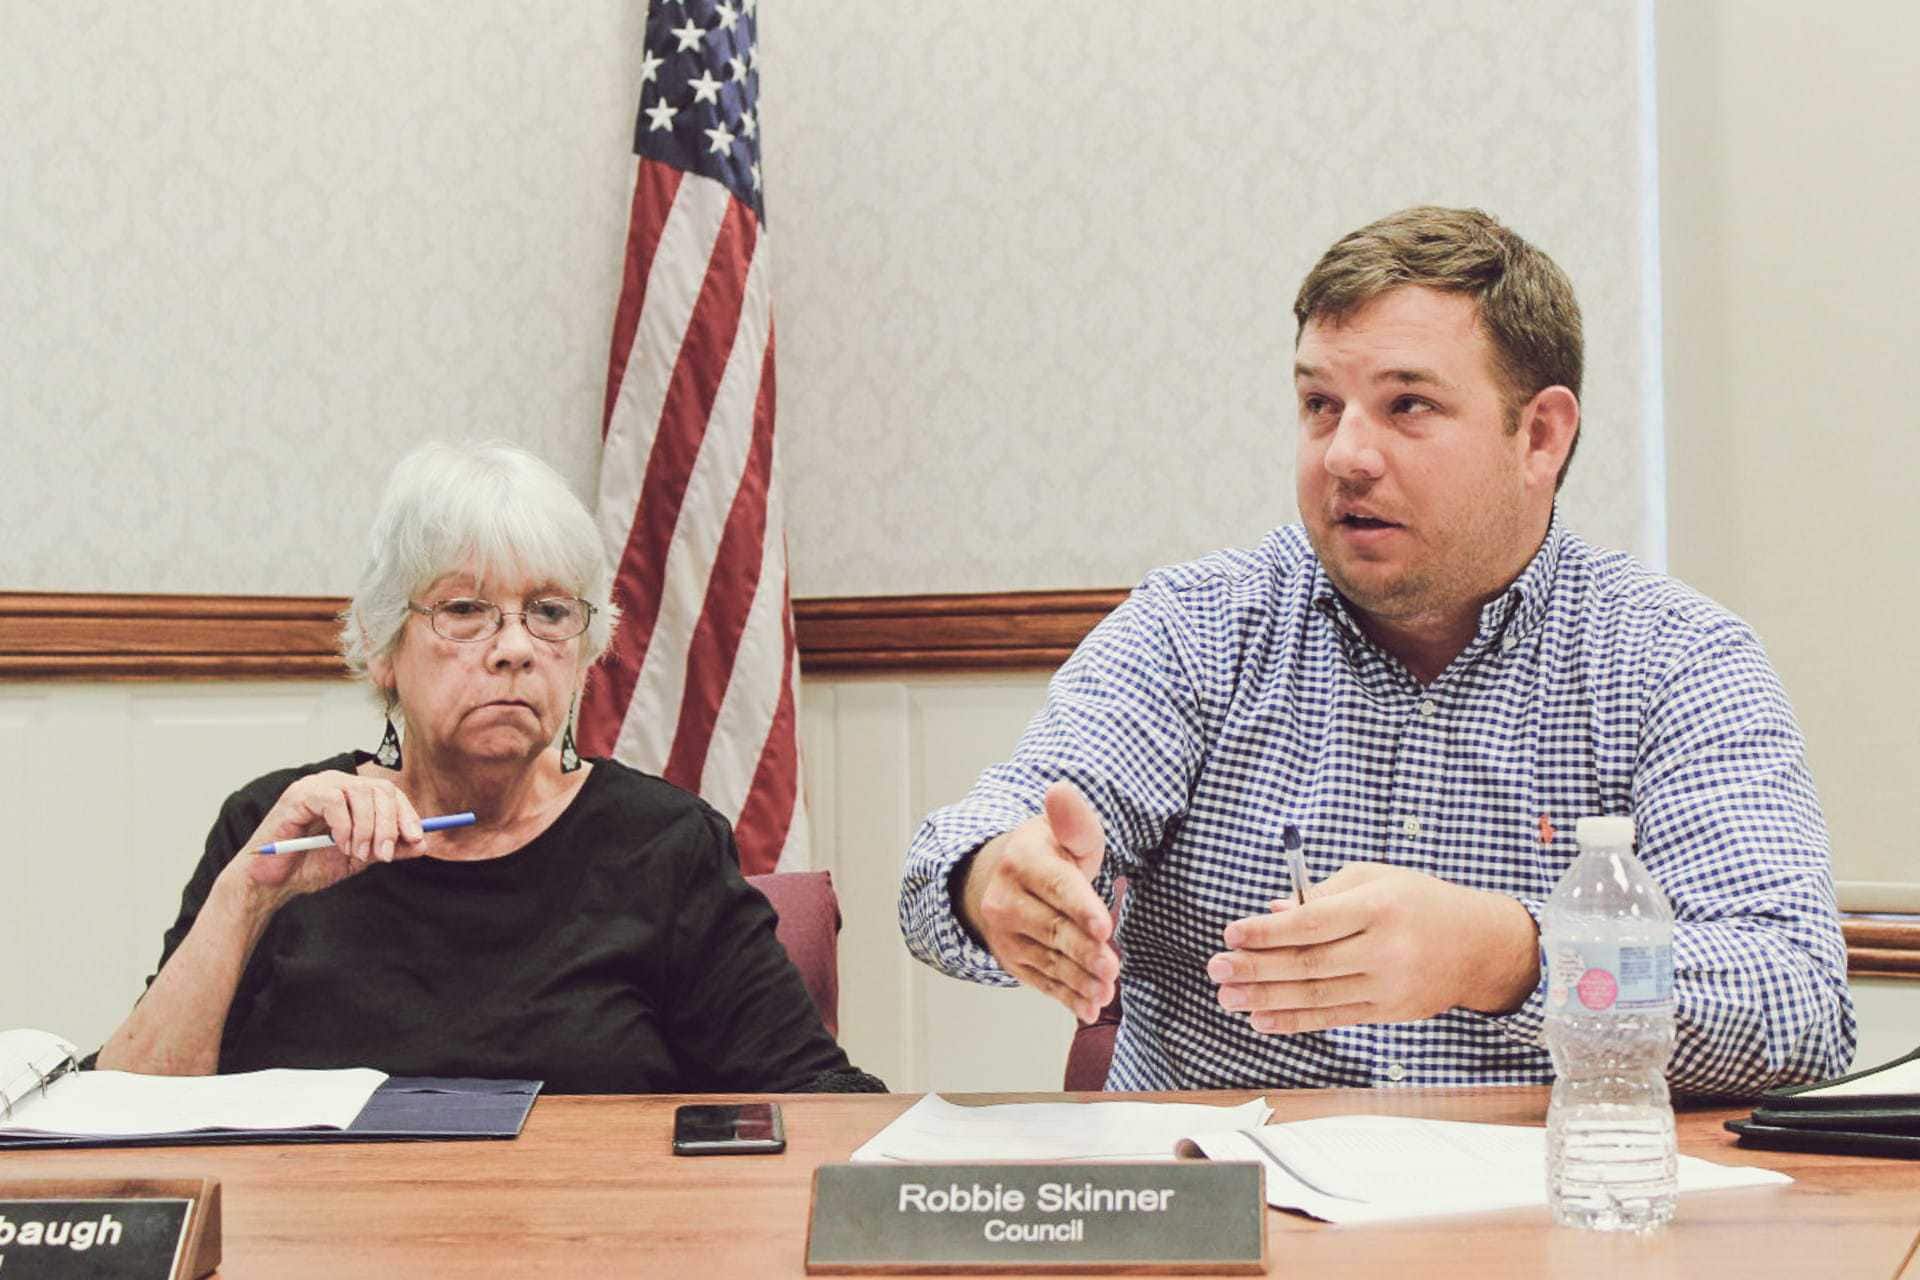 City councilman Robbie Skinner discusses problems with speeding drivers around town at Tuesday's Buckhannon City Council meeting. Councilwoman Mary Albaugh is also pictured.